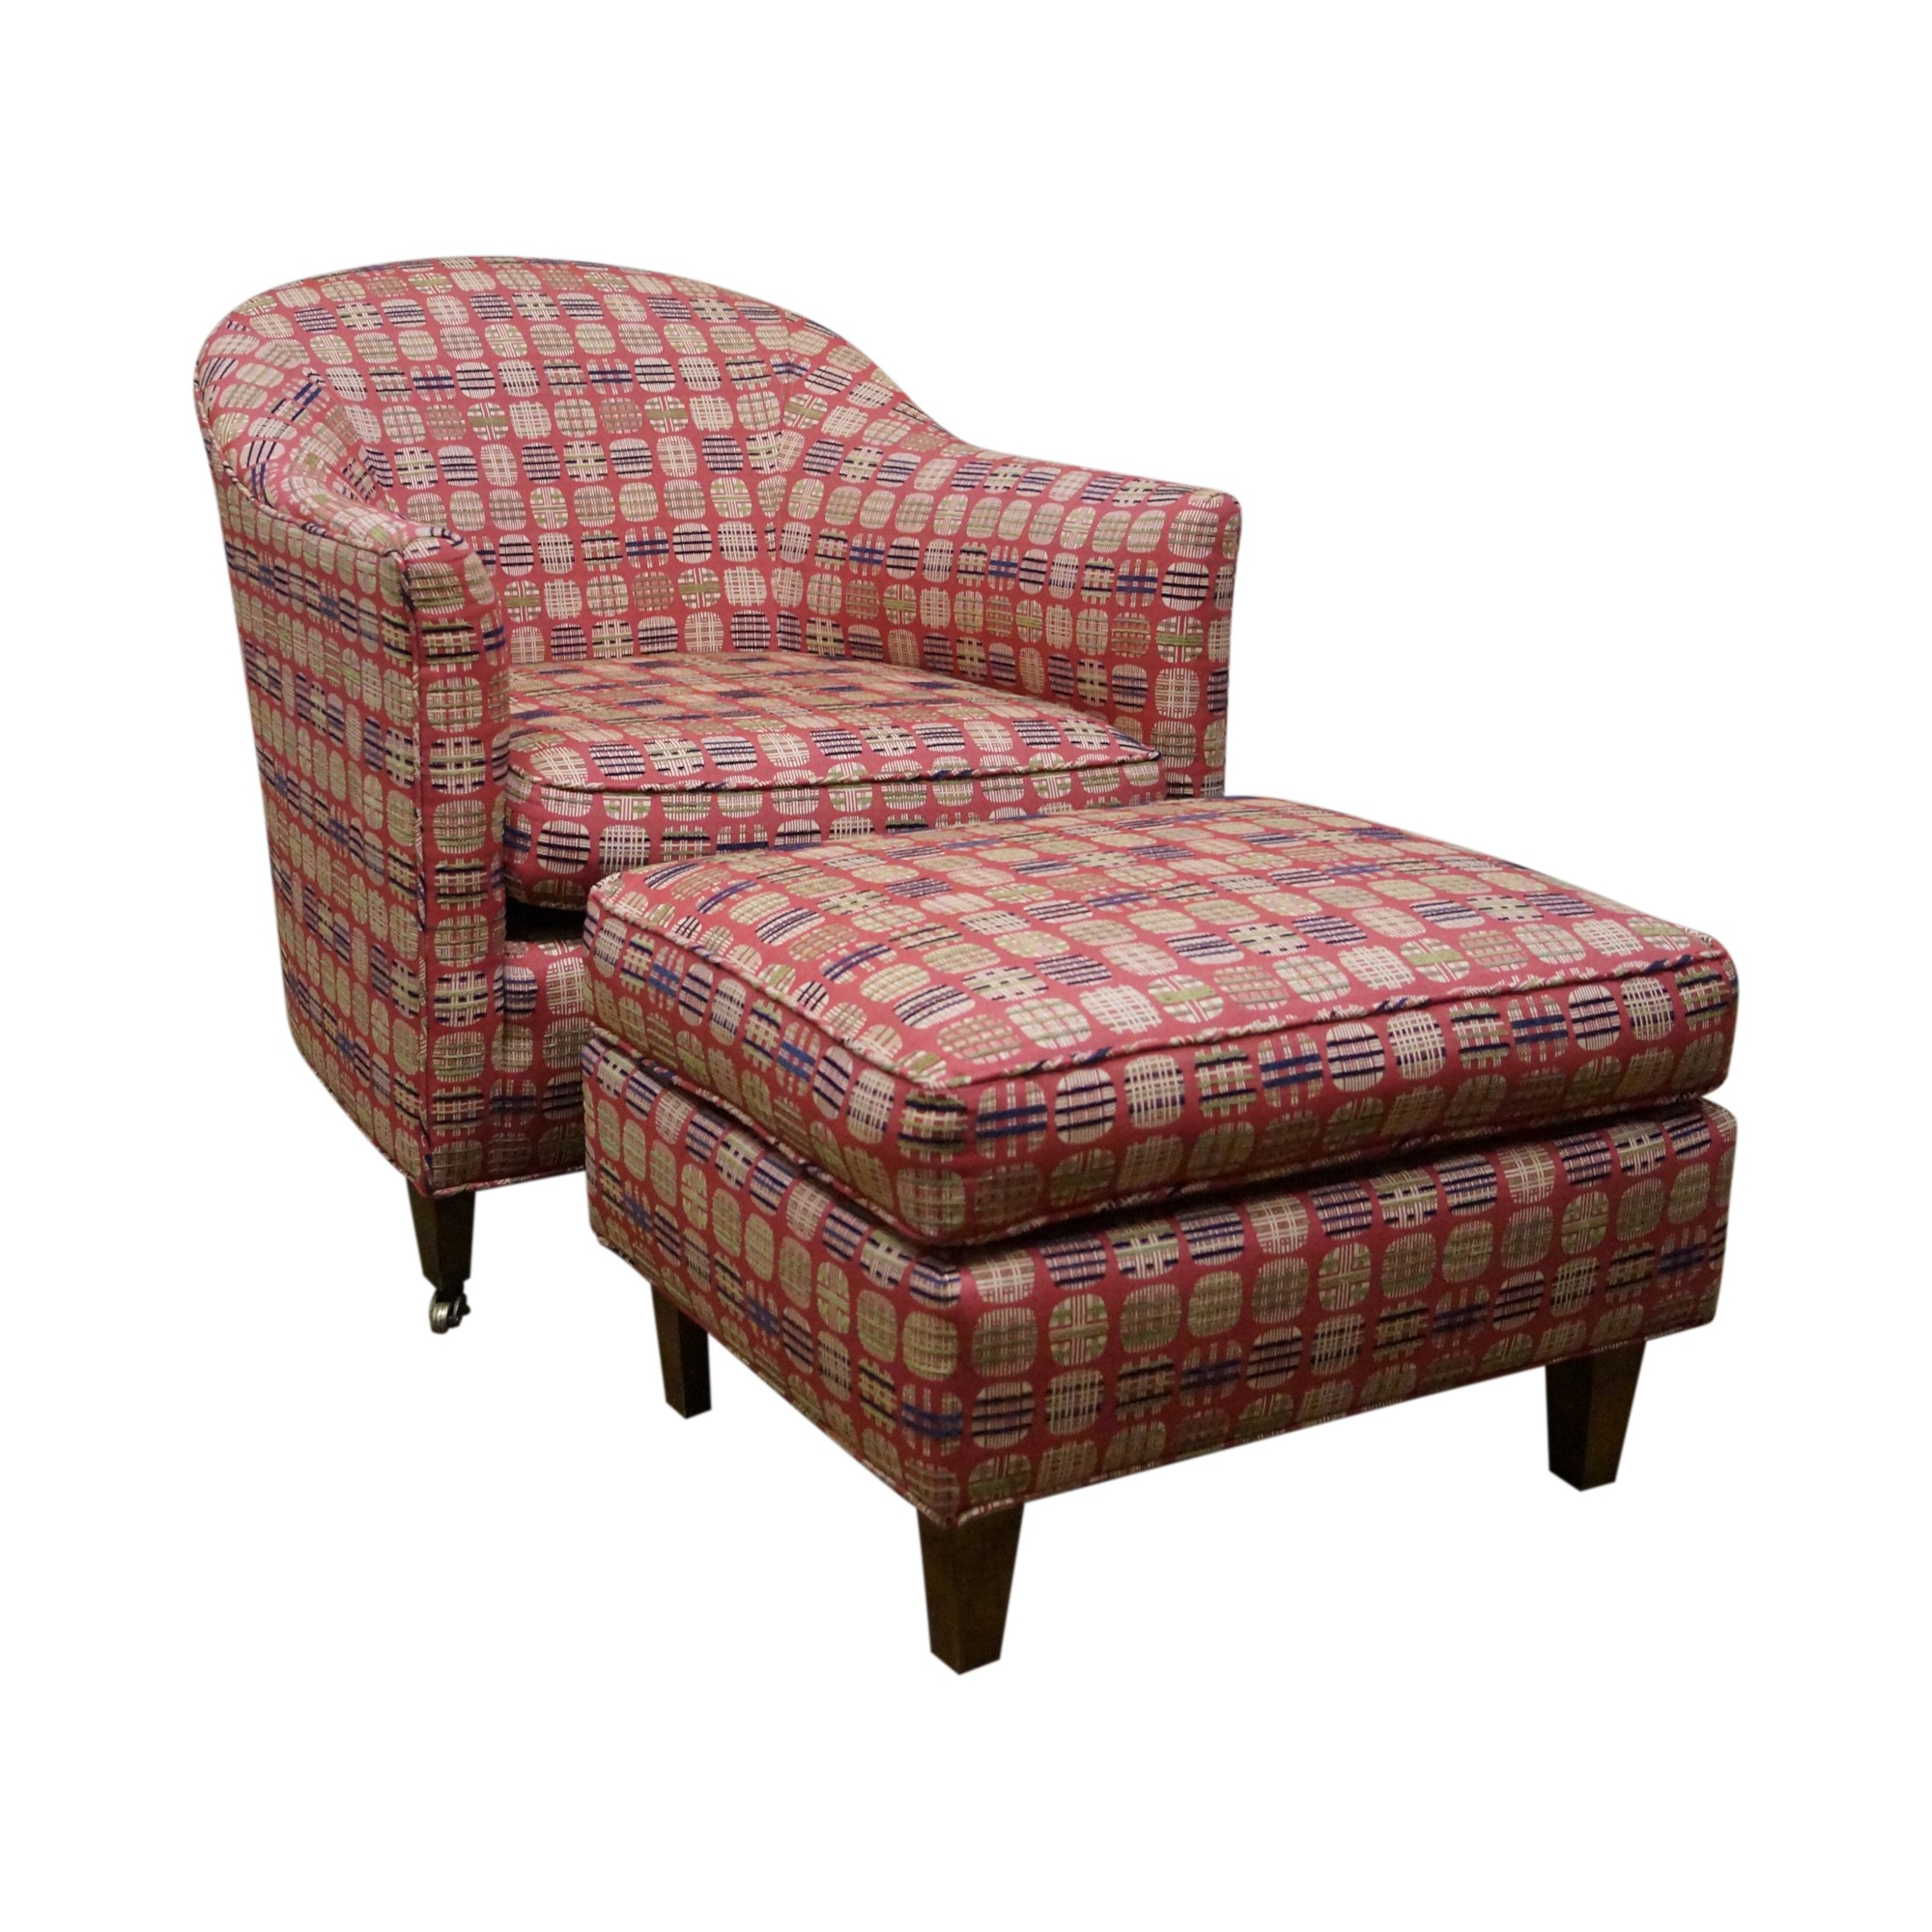 Newerly upholstered barrel back lounge chair chairish